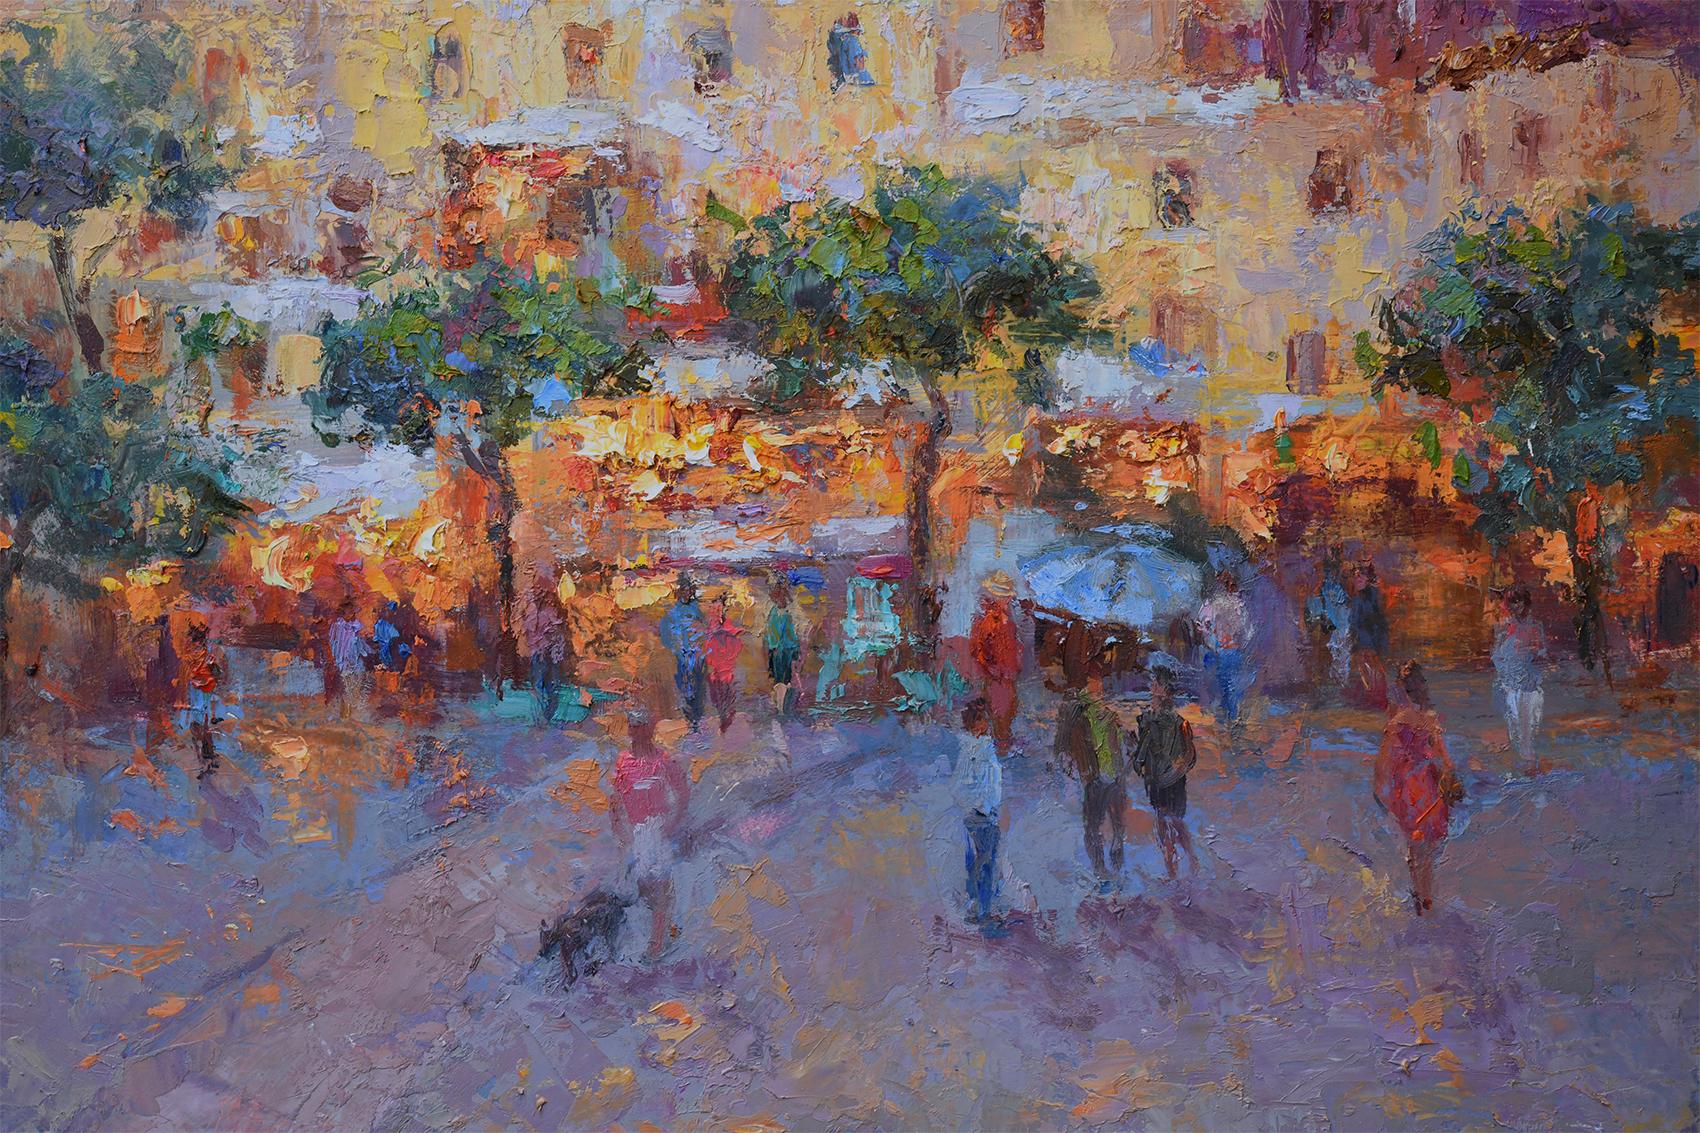 <p>Artist Comments<br />A summer evening on the Amalfi Coast in Italy, with locals and travelers alike enjoying the warm weather and outdoor cafes. 